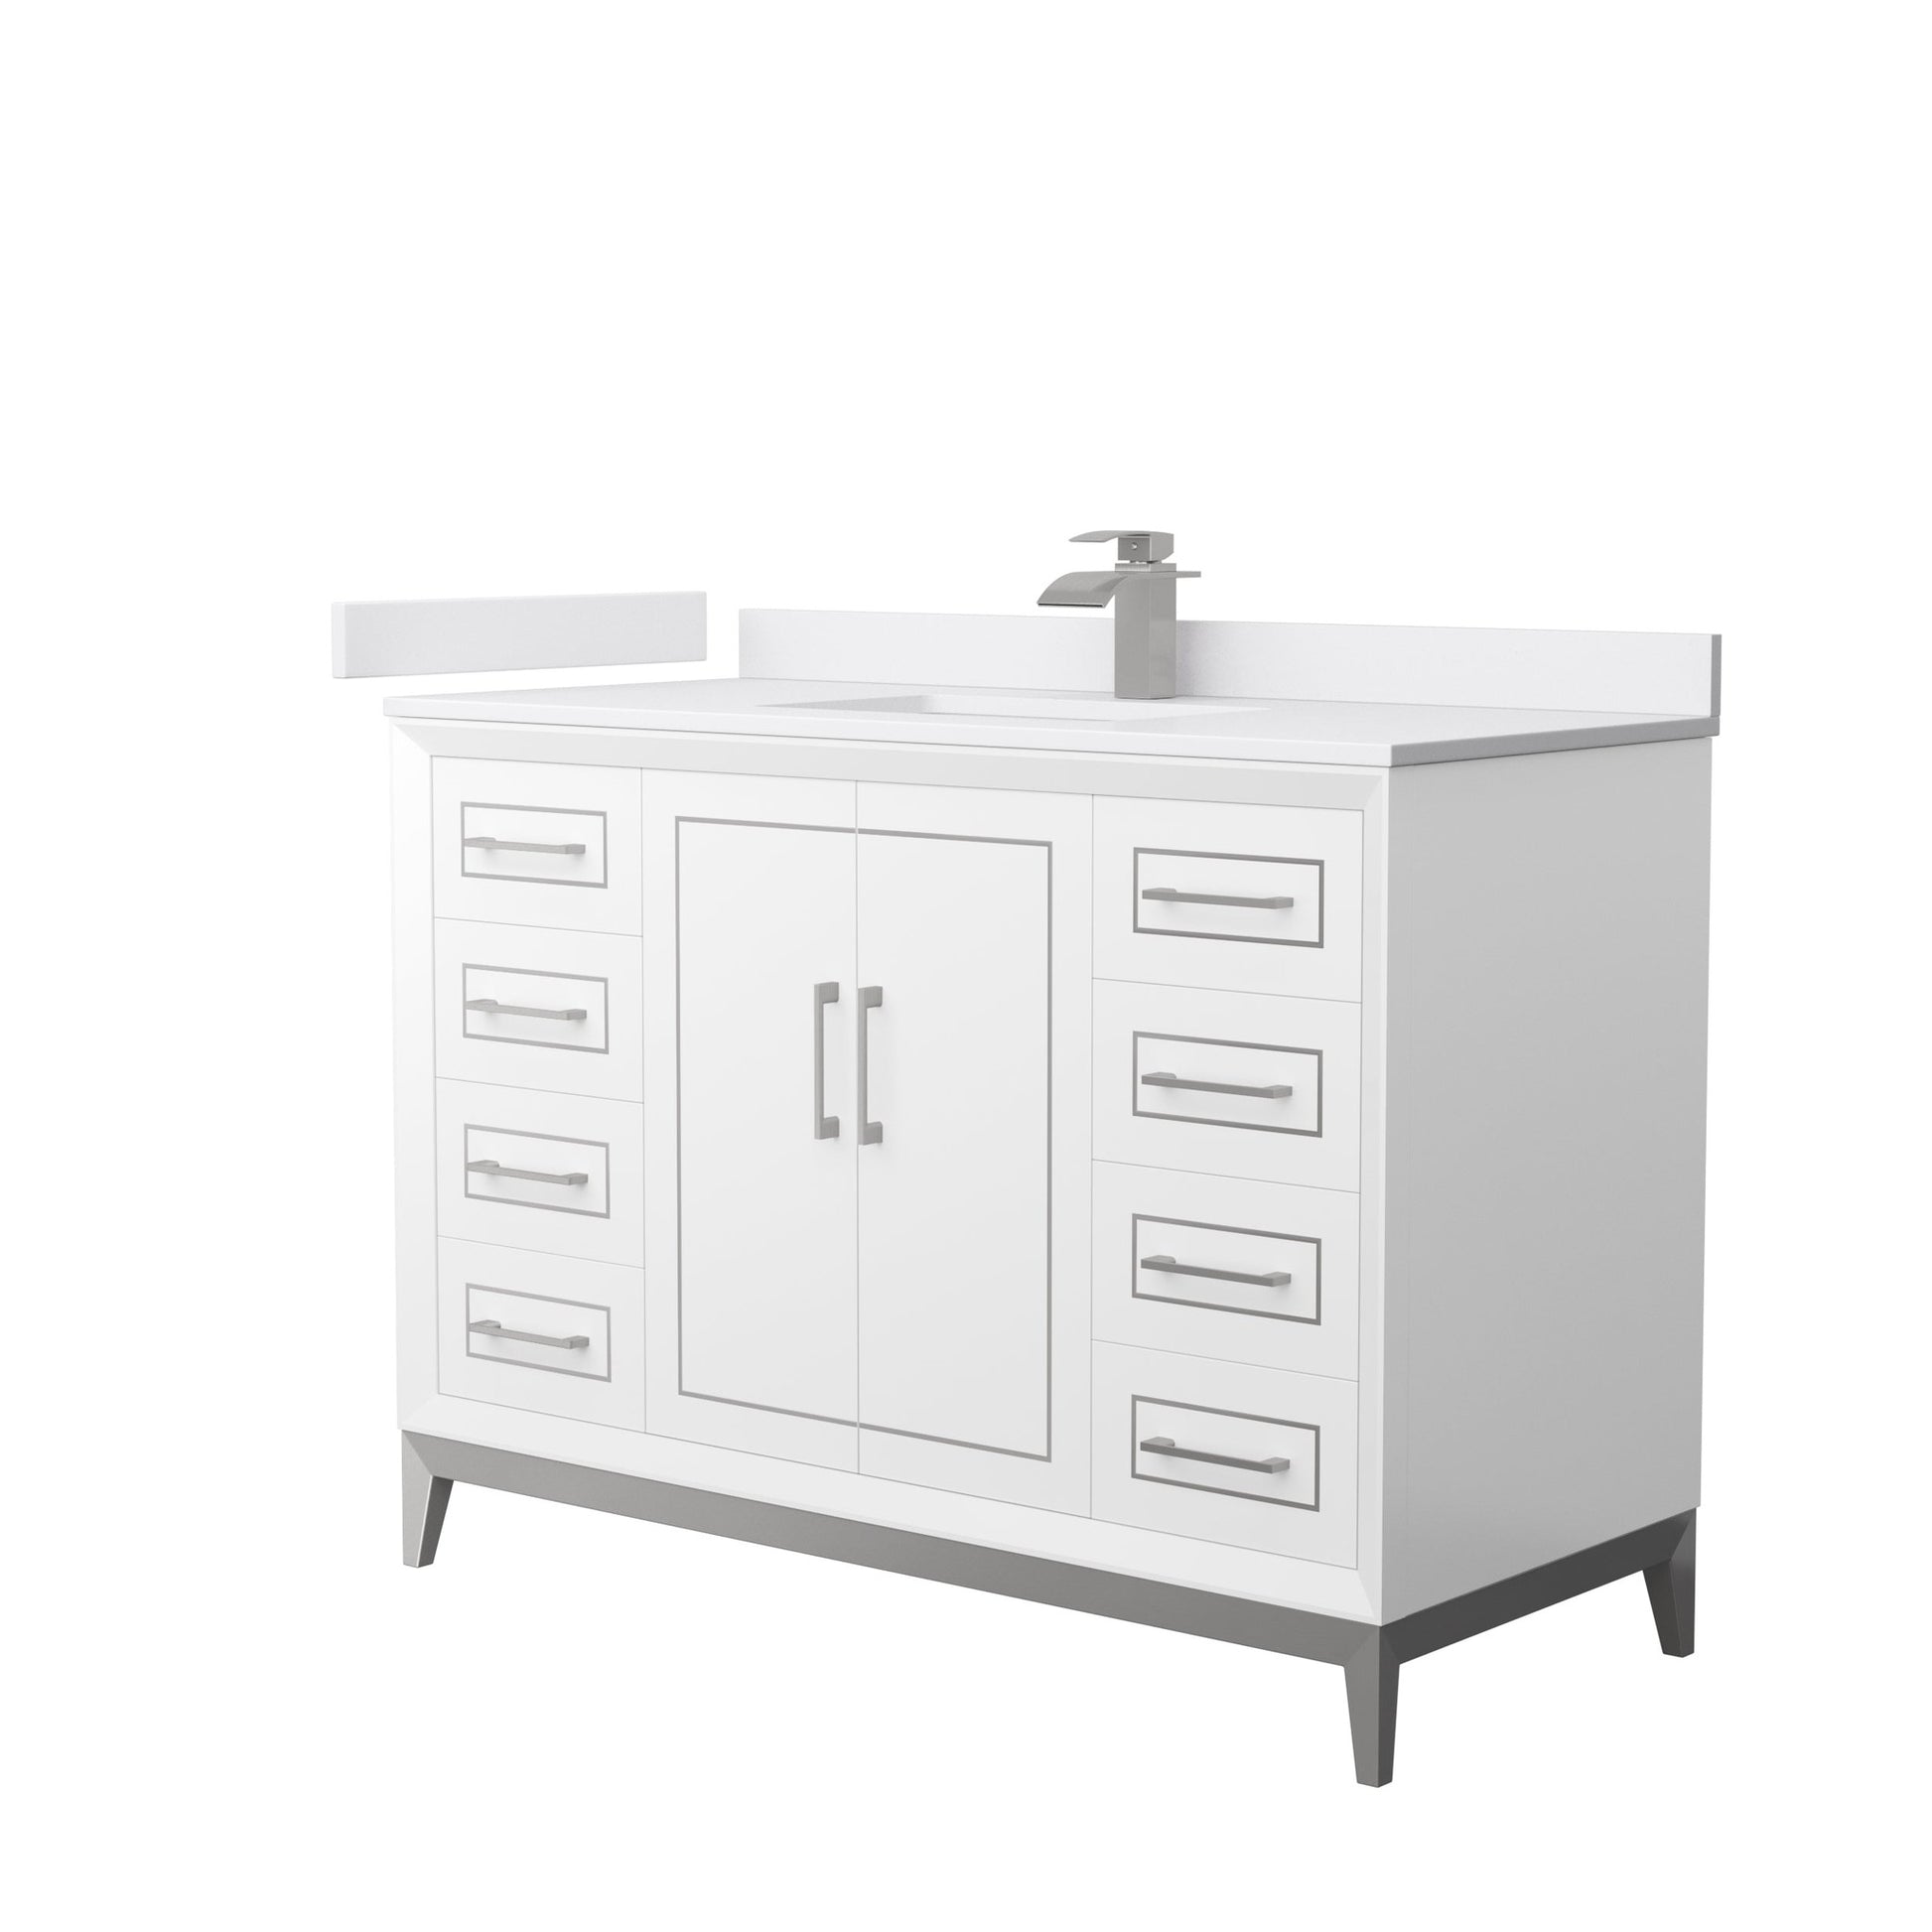 Wyndham Collection Marlena 48" Single Bathroom Vanity in White, White Cultured Marble Countertop, Undermount Square Sink, Brushed Nickel Trim